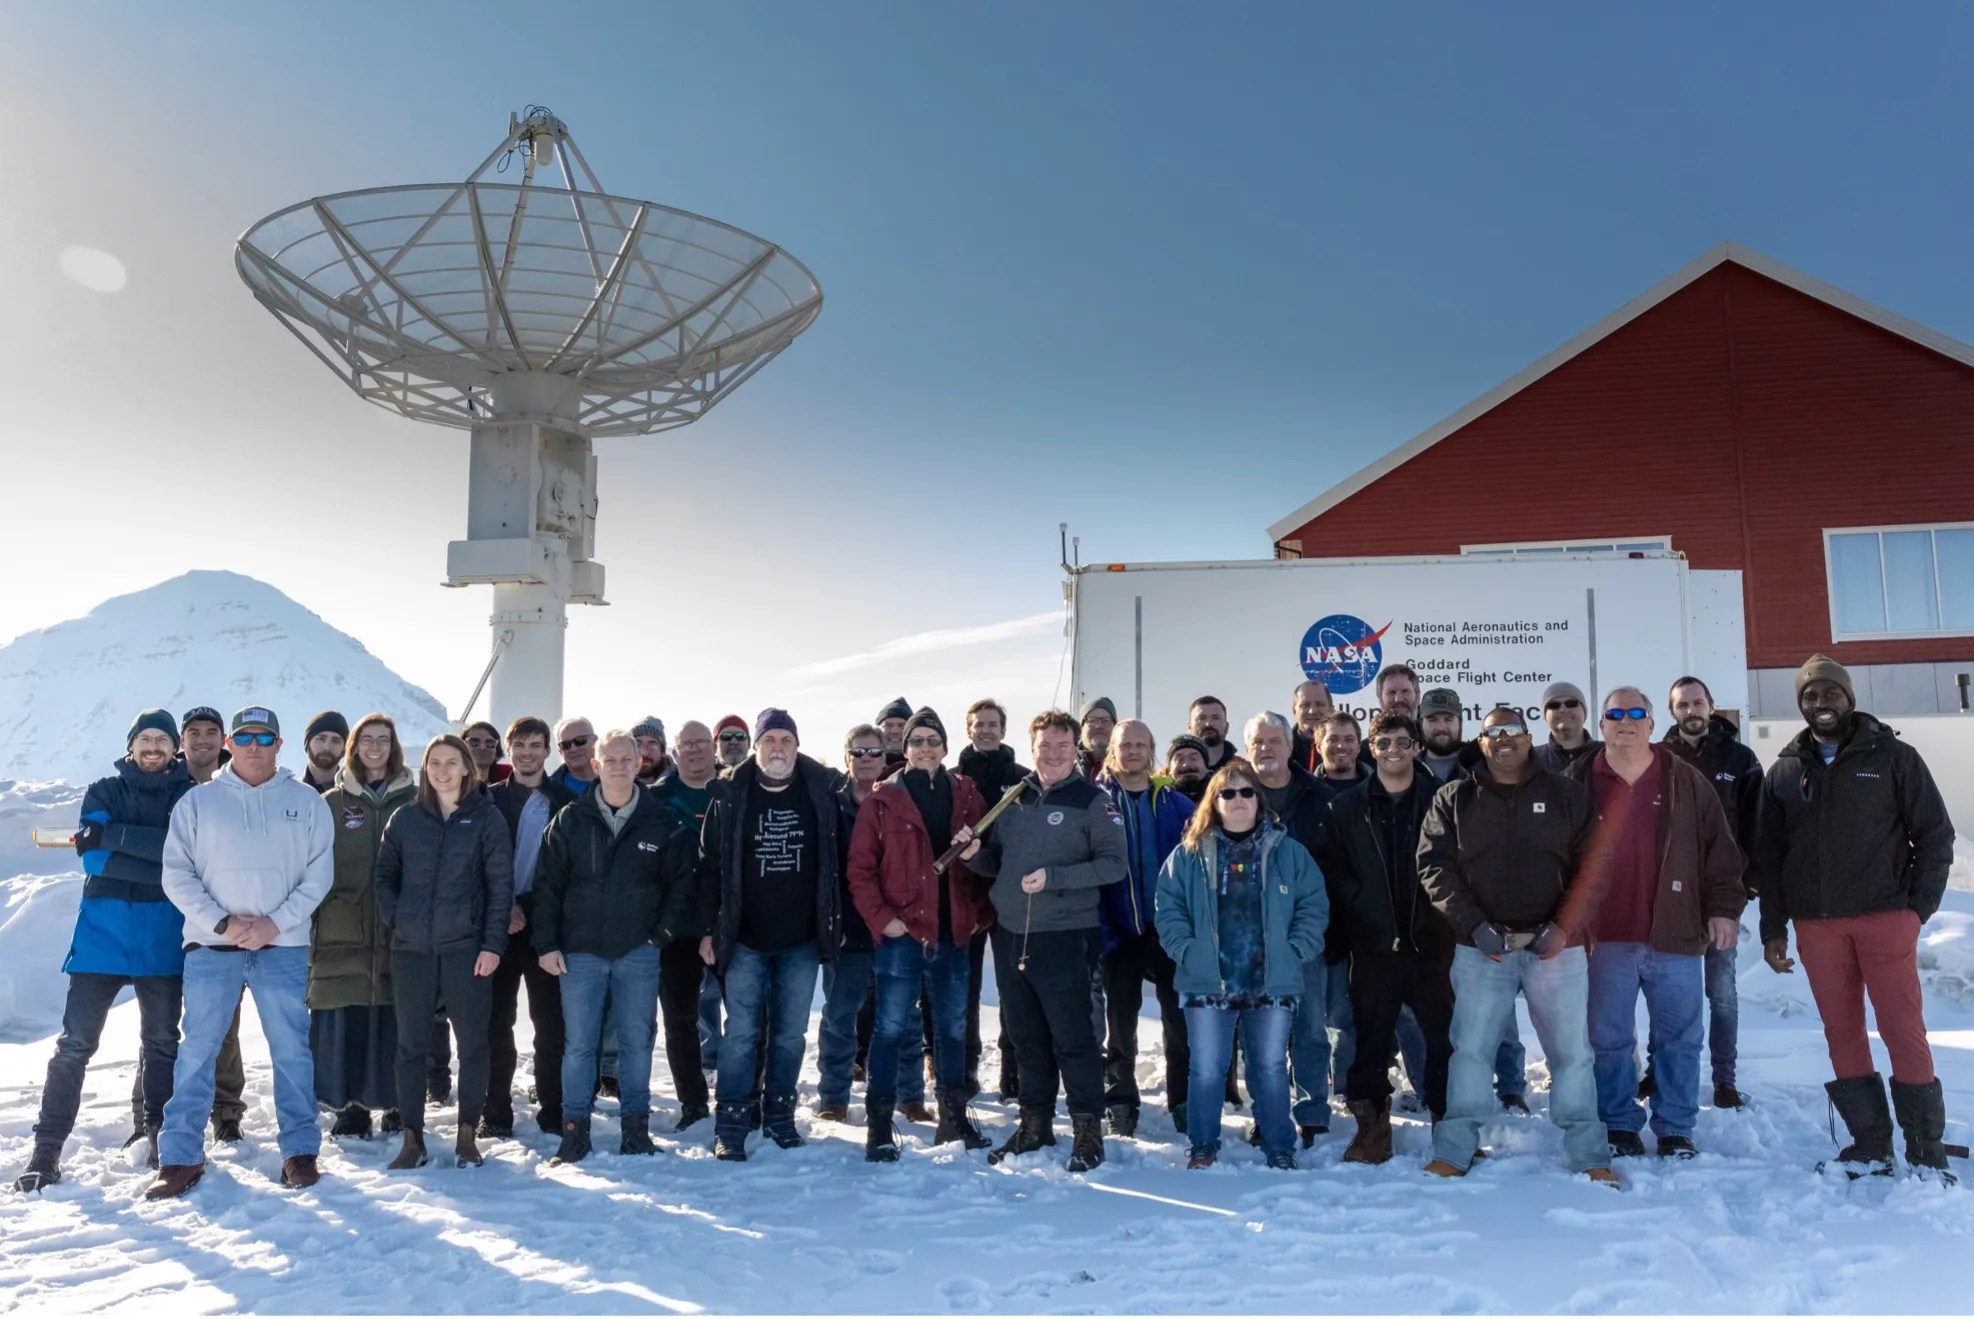 Photo of 35 men and women standing in front of a satellite dish and truck with the NASA logo on it. there is snow on the ground a mountain in the background.